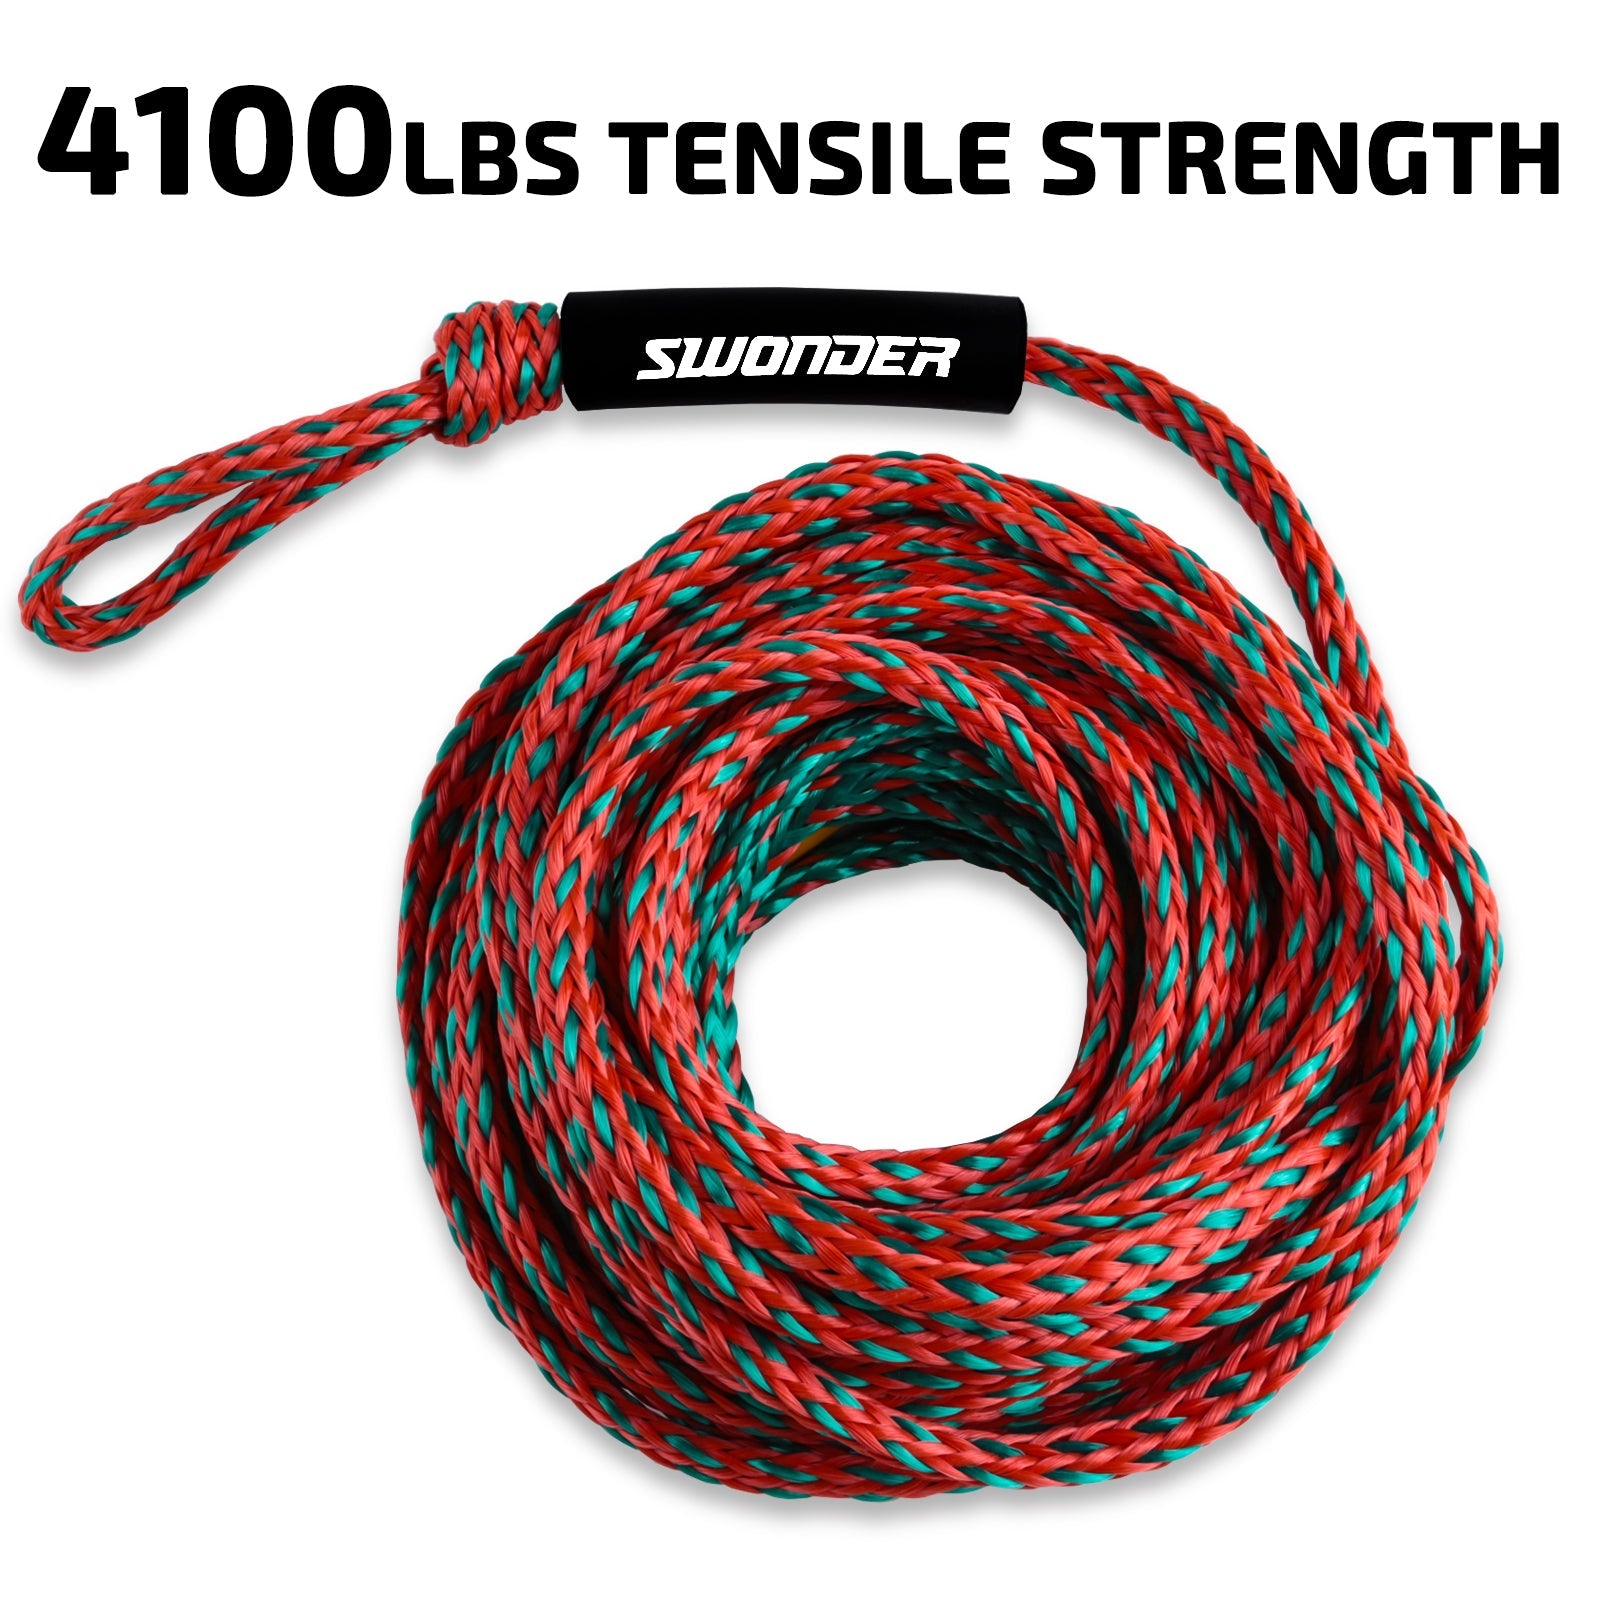 Swonder 4 Riders 2-Section Tow Ropes